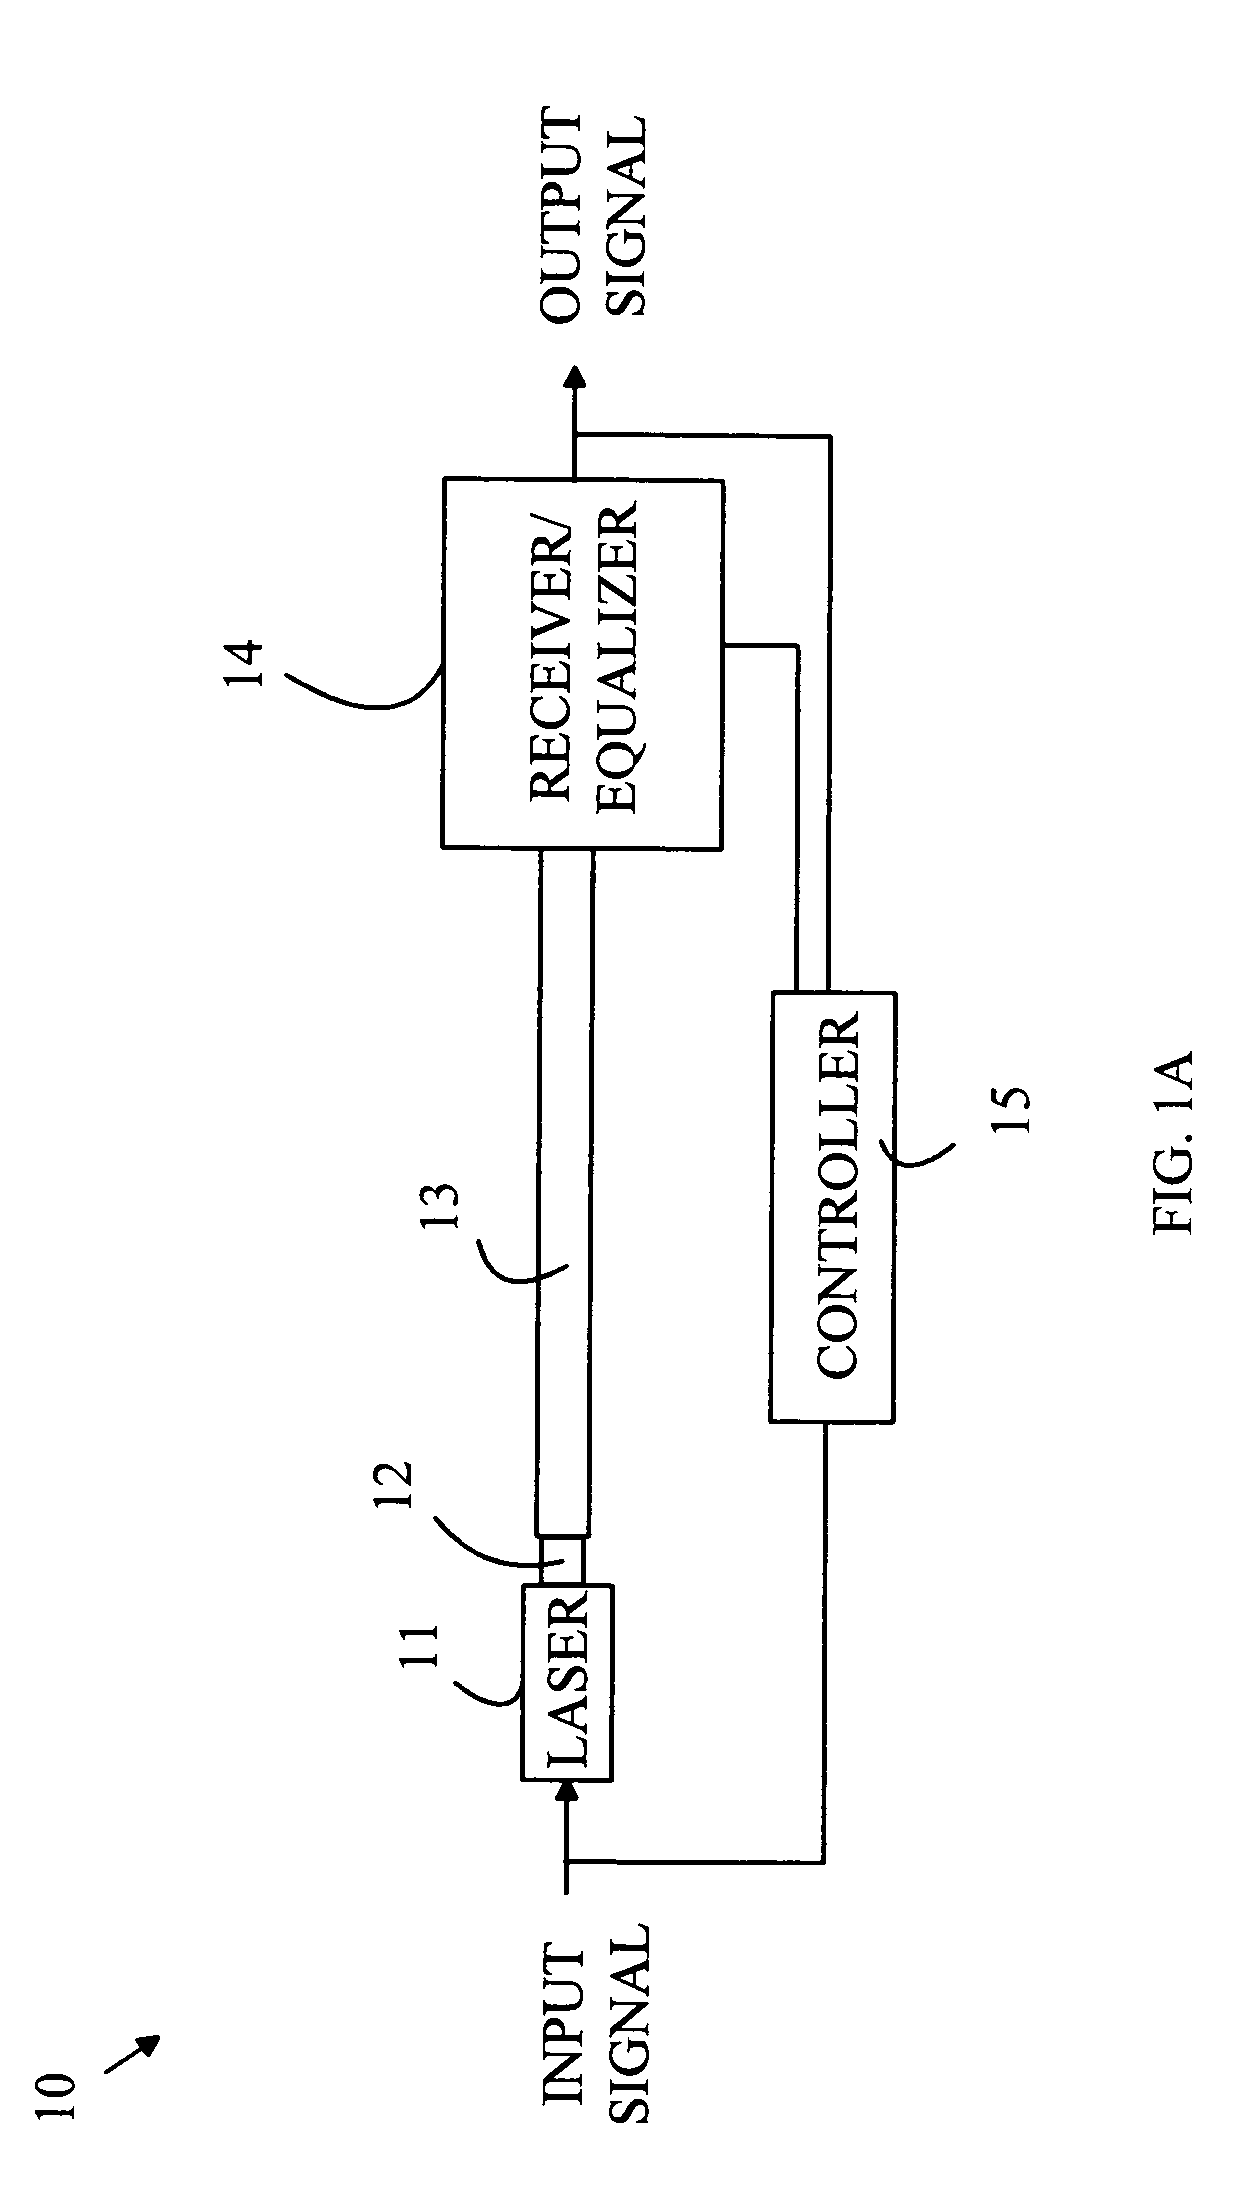 Communications system employing single-mode lasers and multimode optical fibers